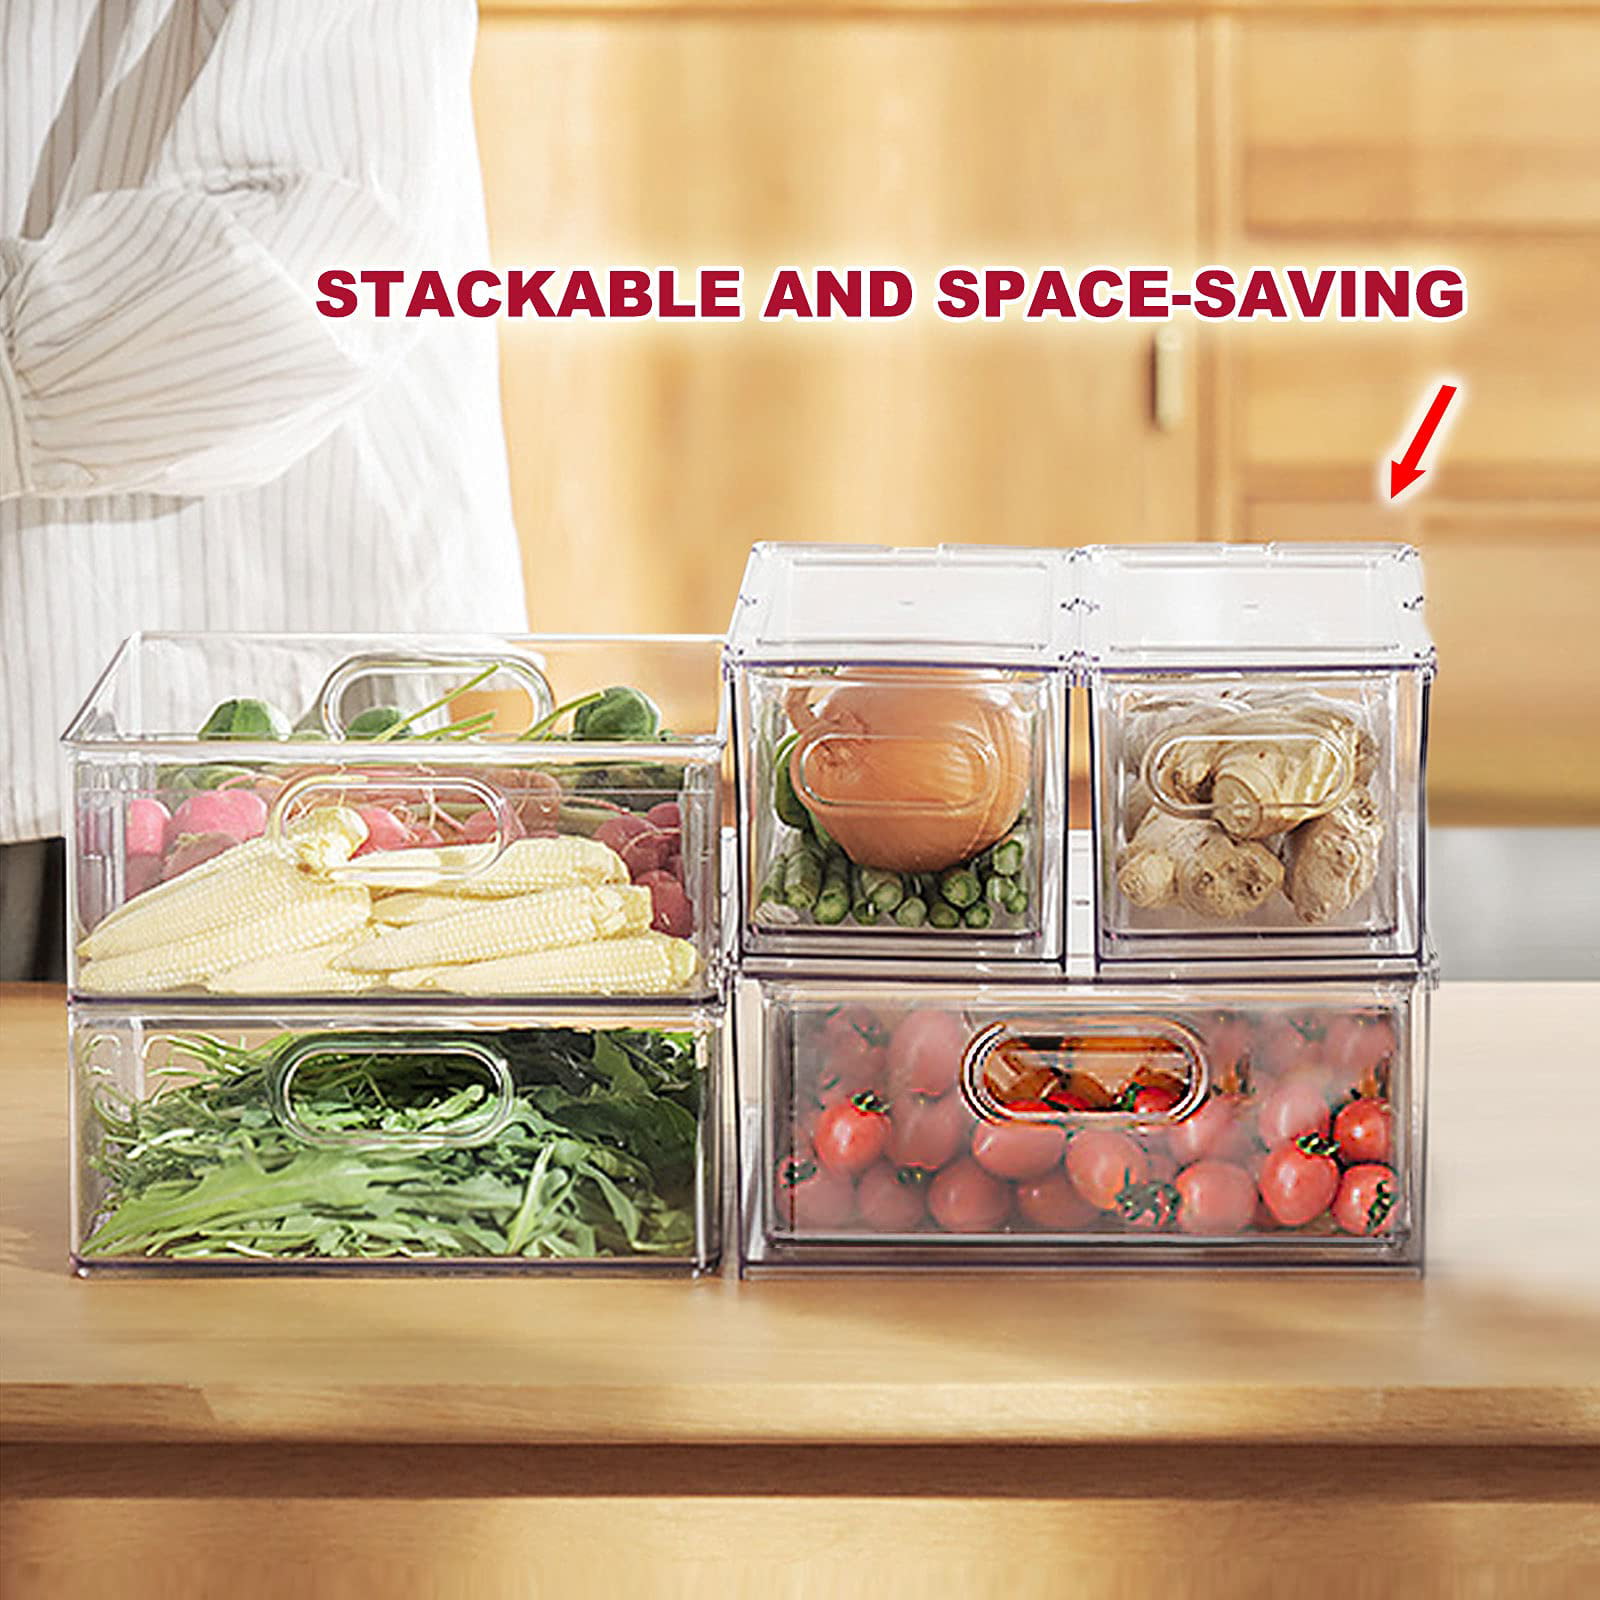 elabo Food Storage Containers Fridge Produce Saver- 3 Piece Set Stackable  Refrigerator Organizer Keeper Drawers Bins Baskets with Lids and Removable